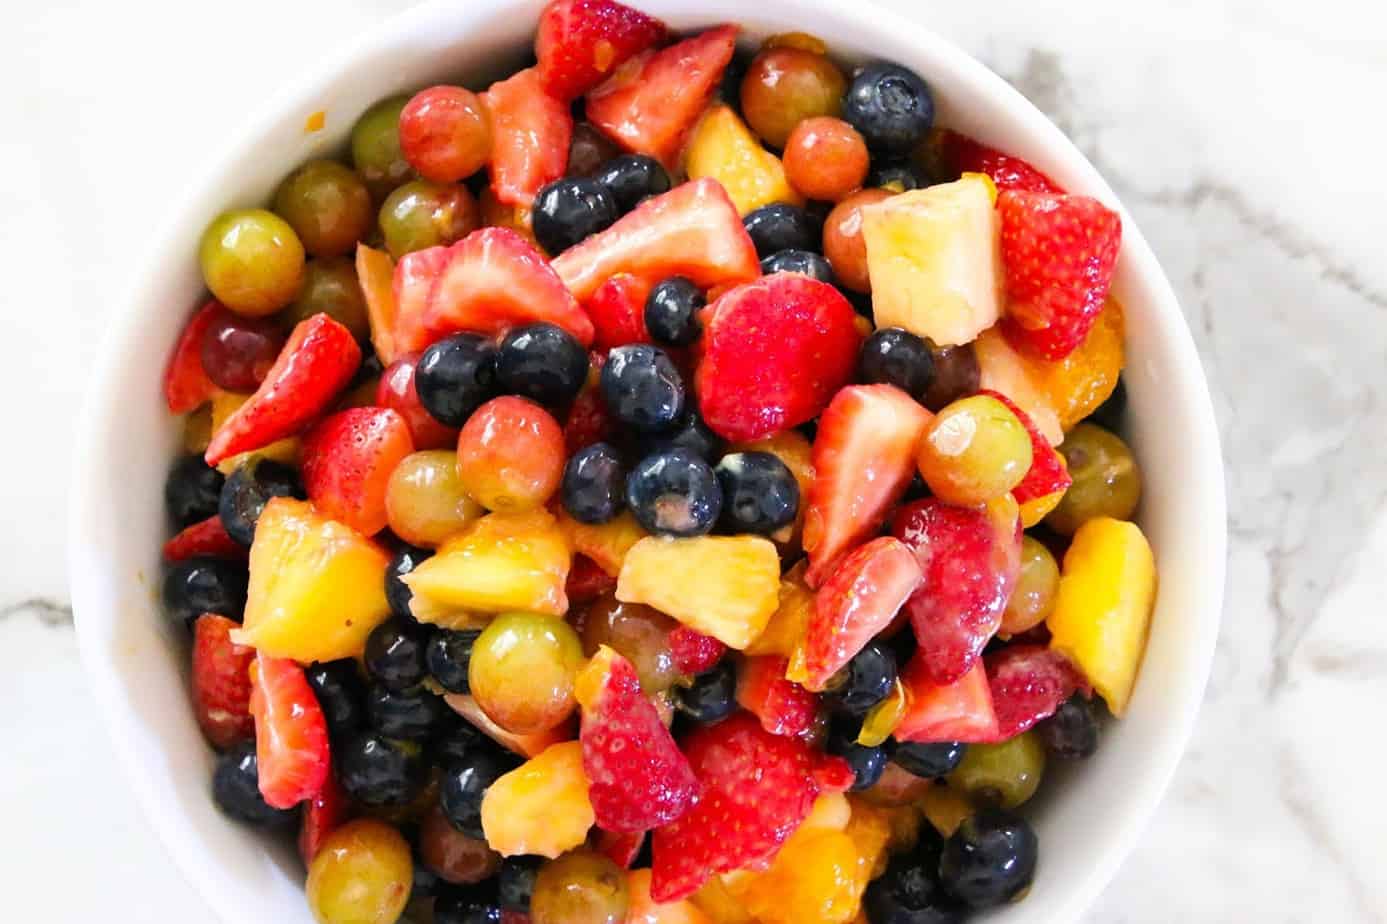 A healthy bow of fruit salad with variety of berries